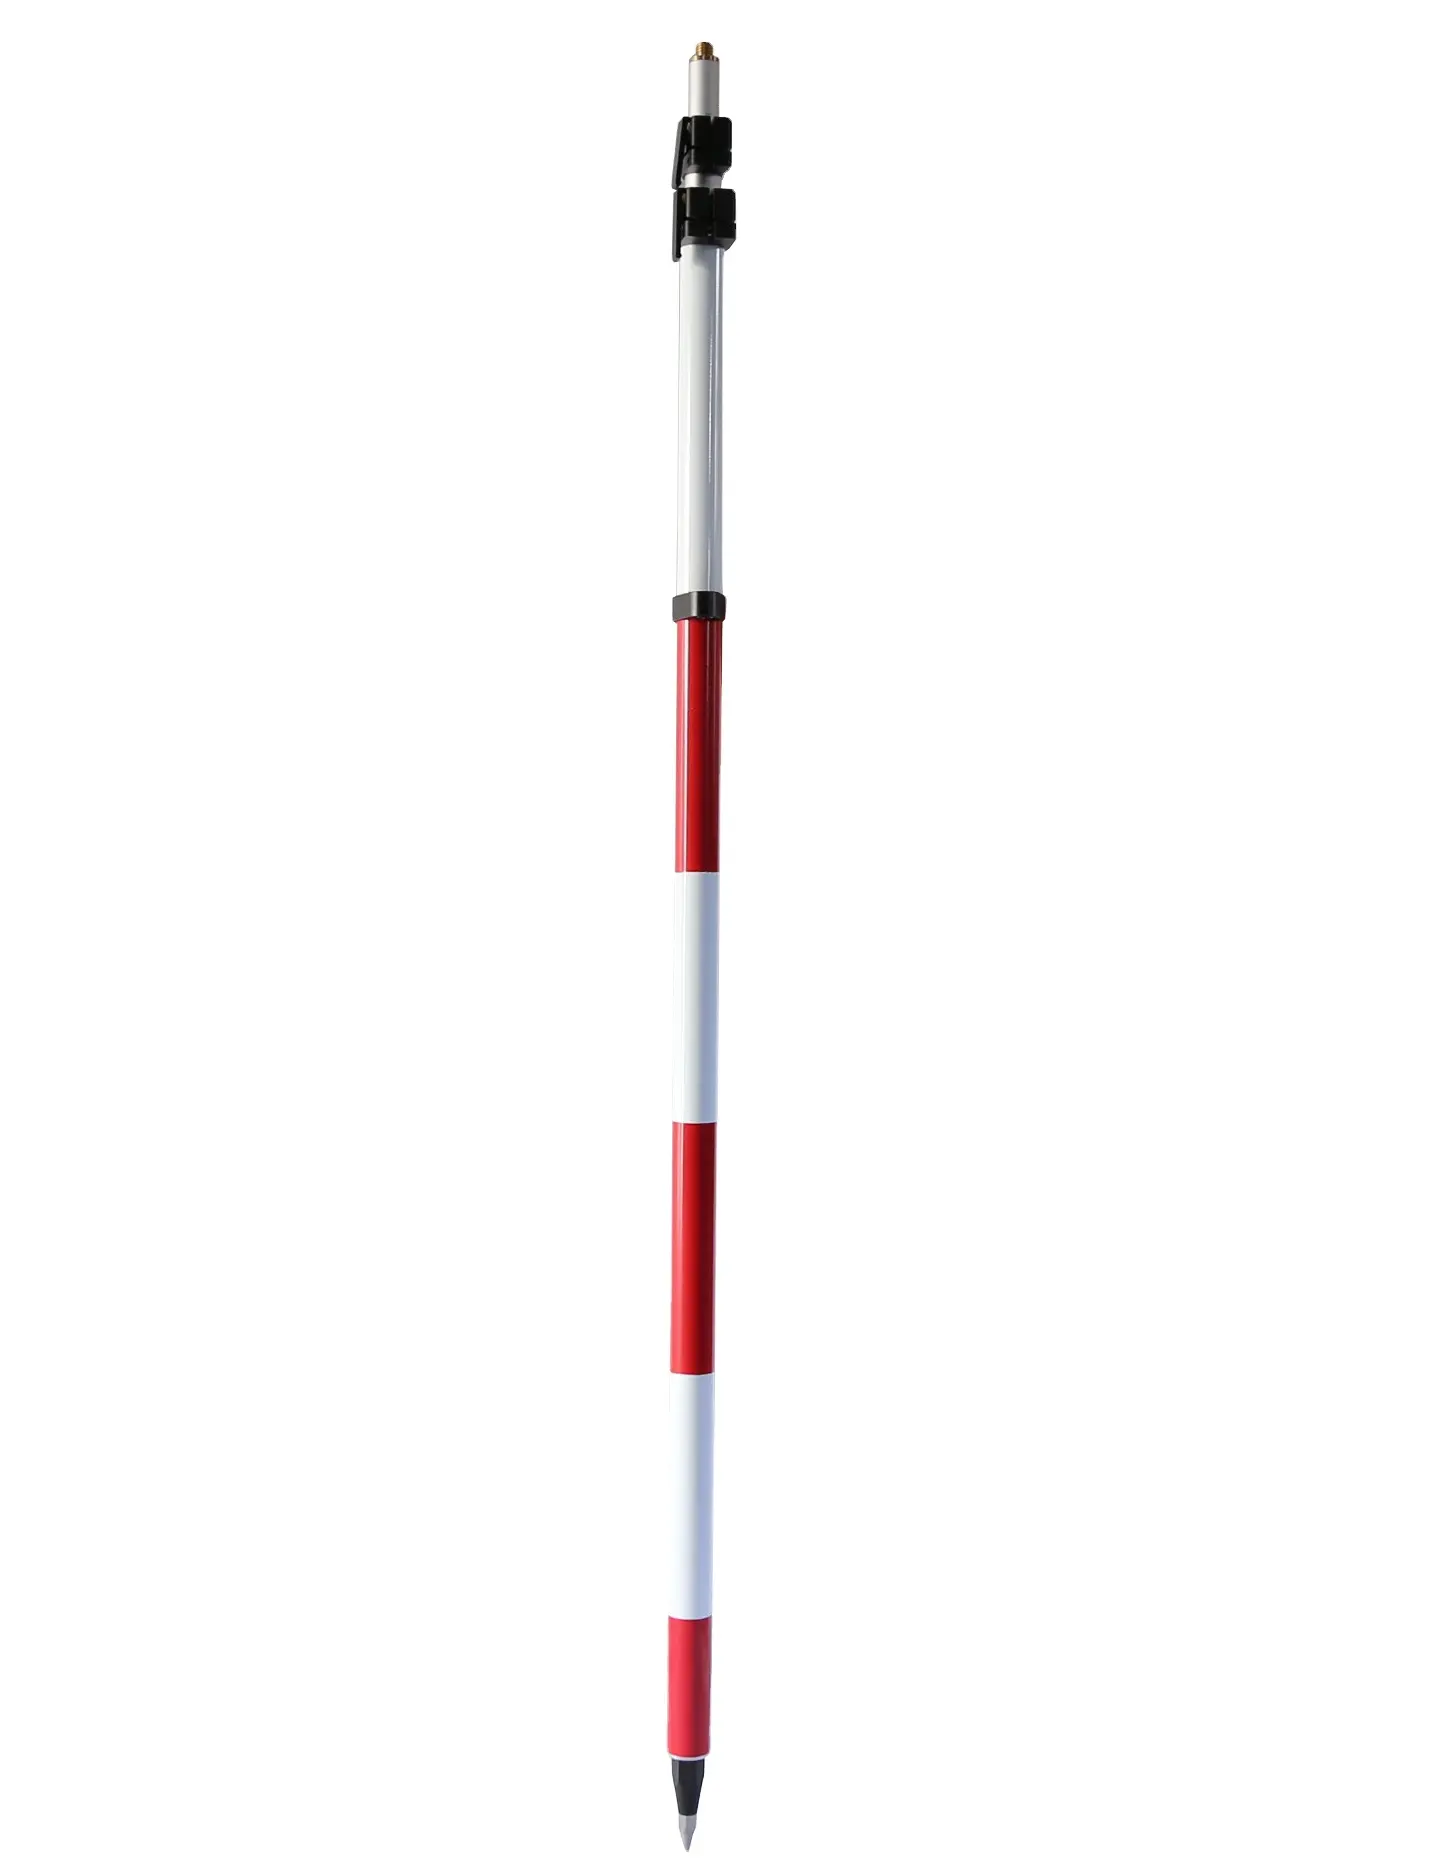 Factory Telescopic Survey Aluminum Prism Pole Rod 5.3m 4.6m 2 3 Section with Twist Lock Quick Lock for Total Station